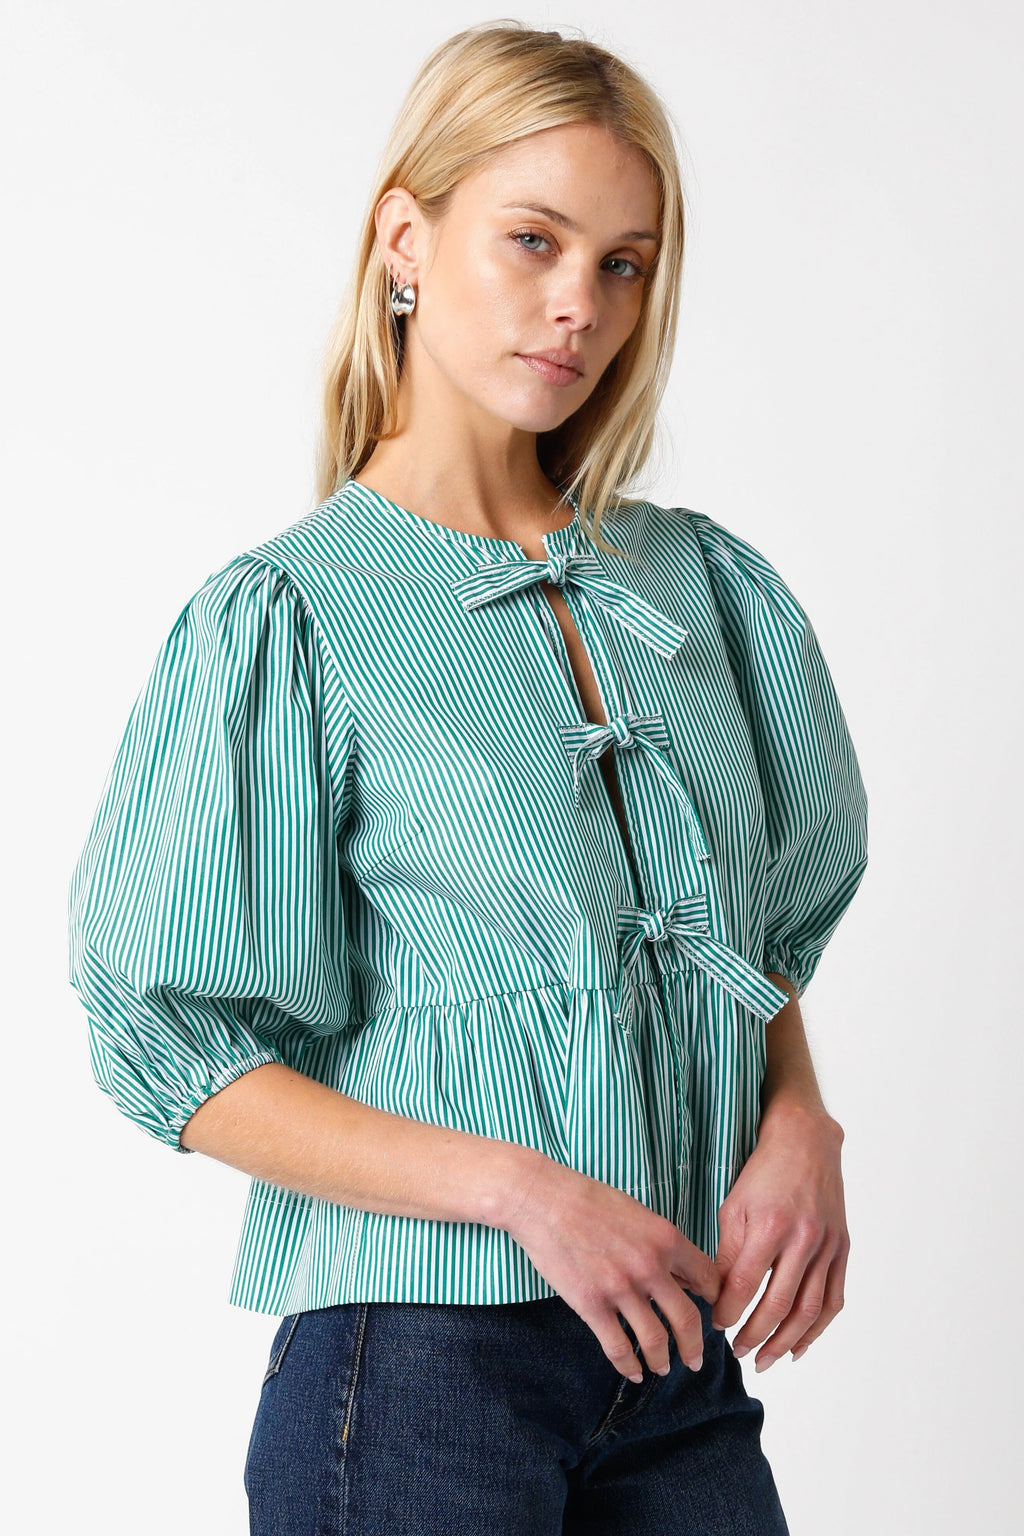 Melanie Bow Top in Green and White Stripe by Olivaceous